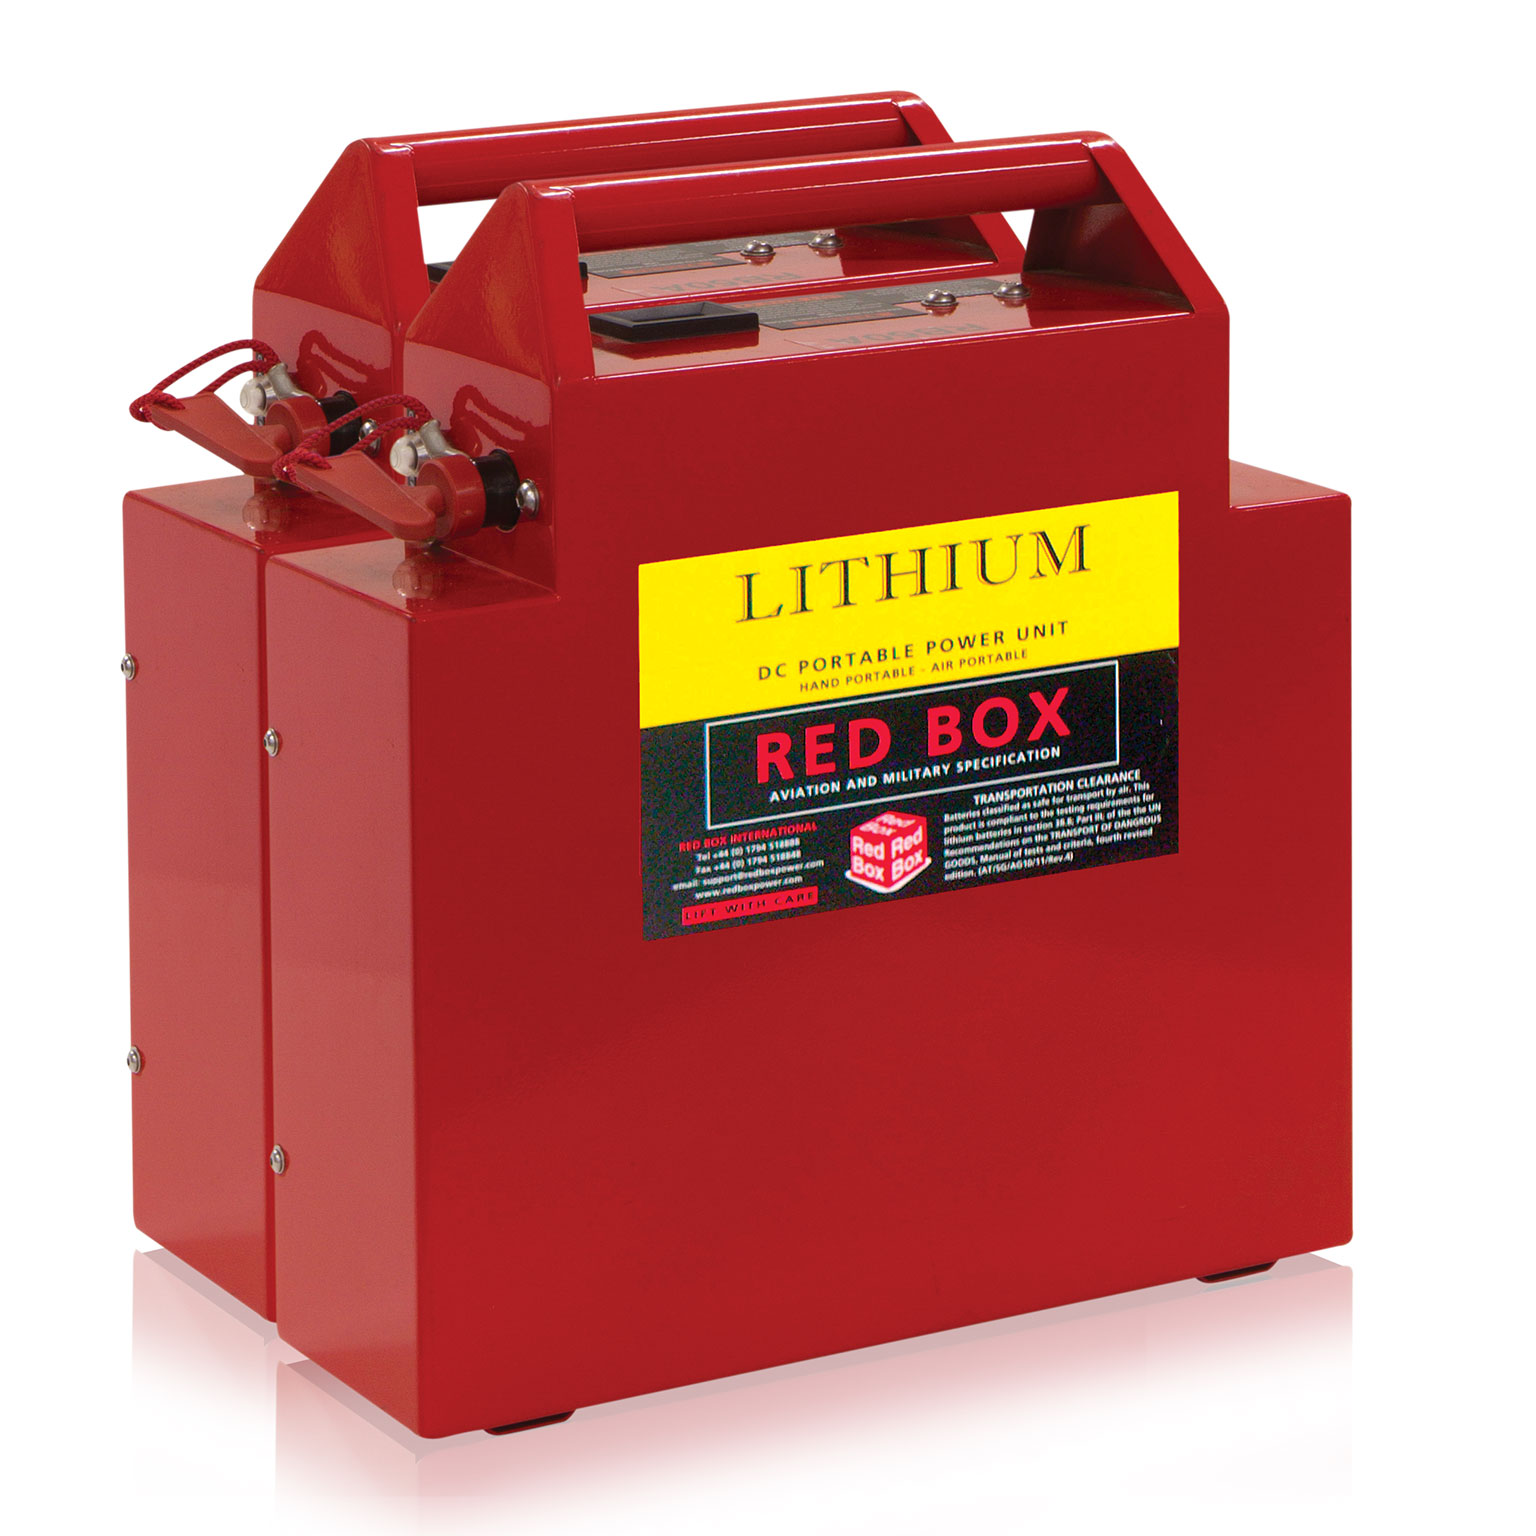 Twin RBL 4000. start power units. Portable Power Banks offered by Patlon in Canada